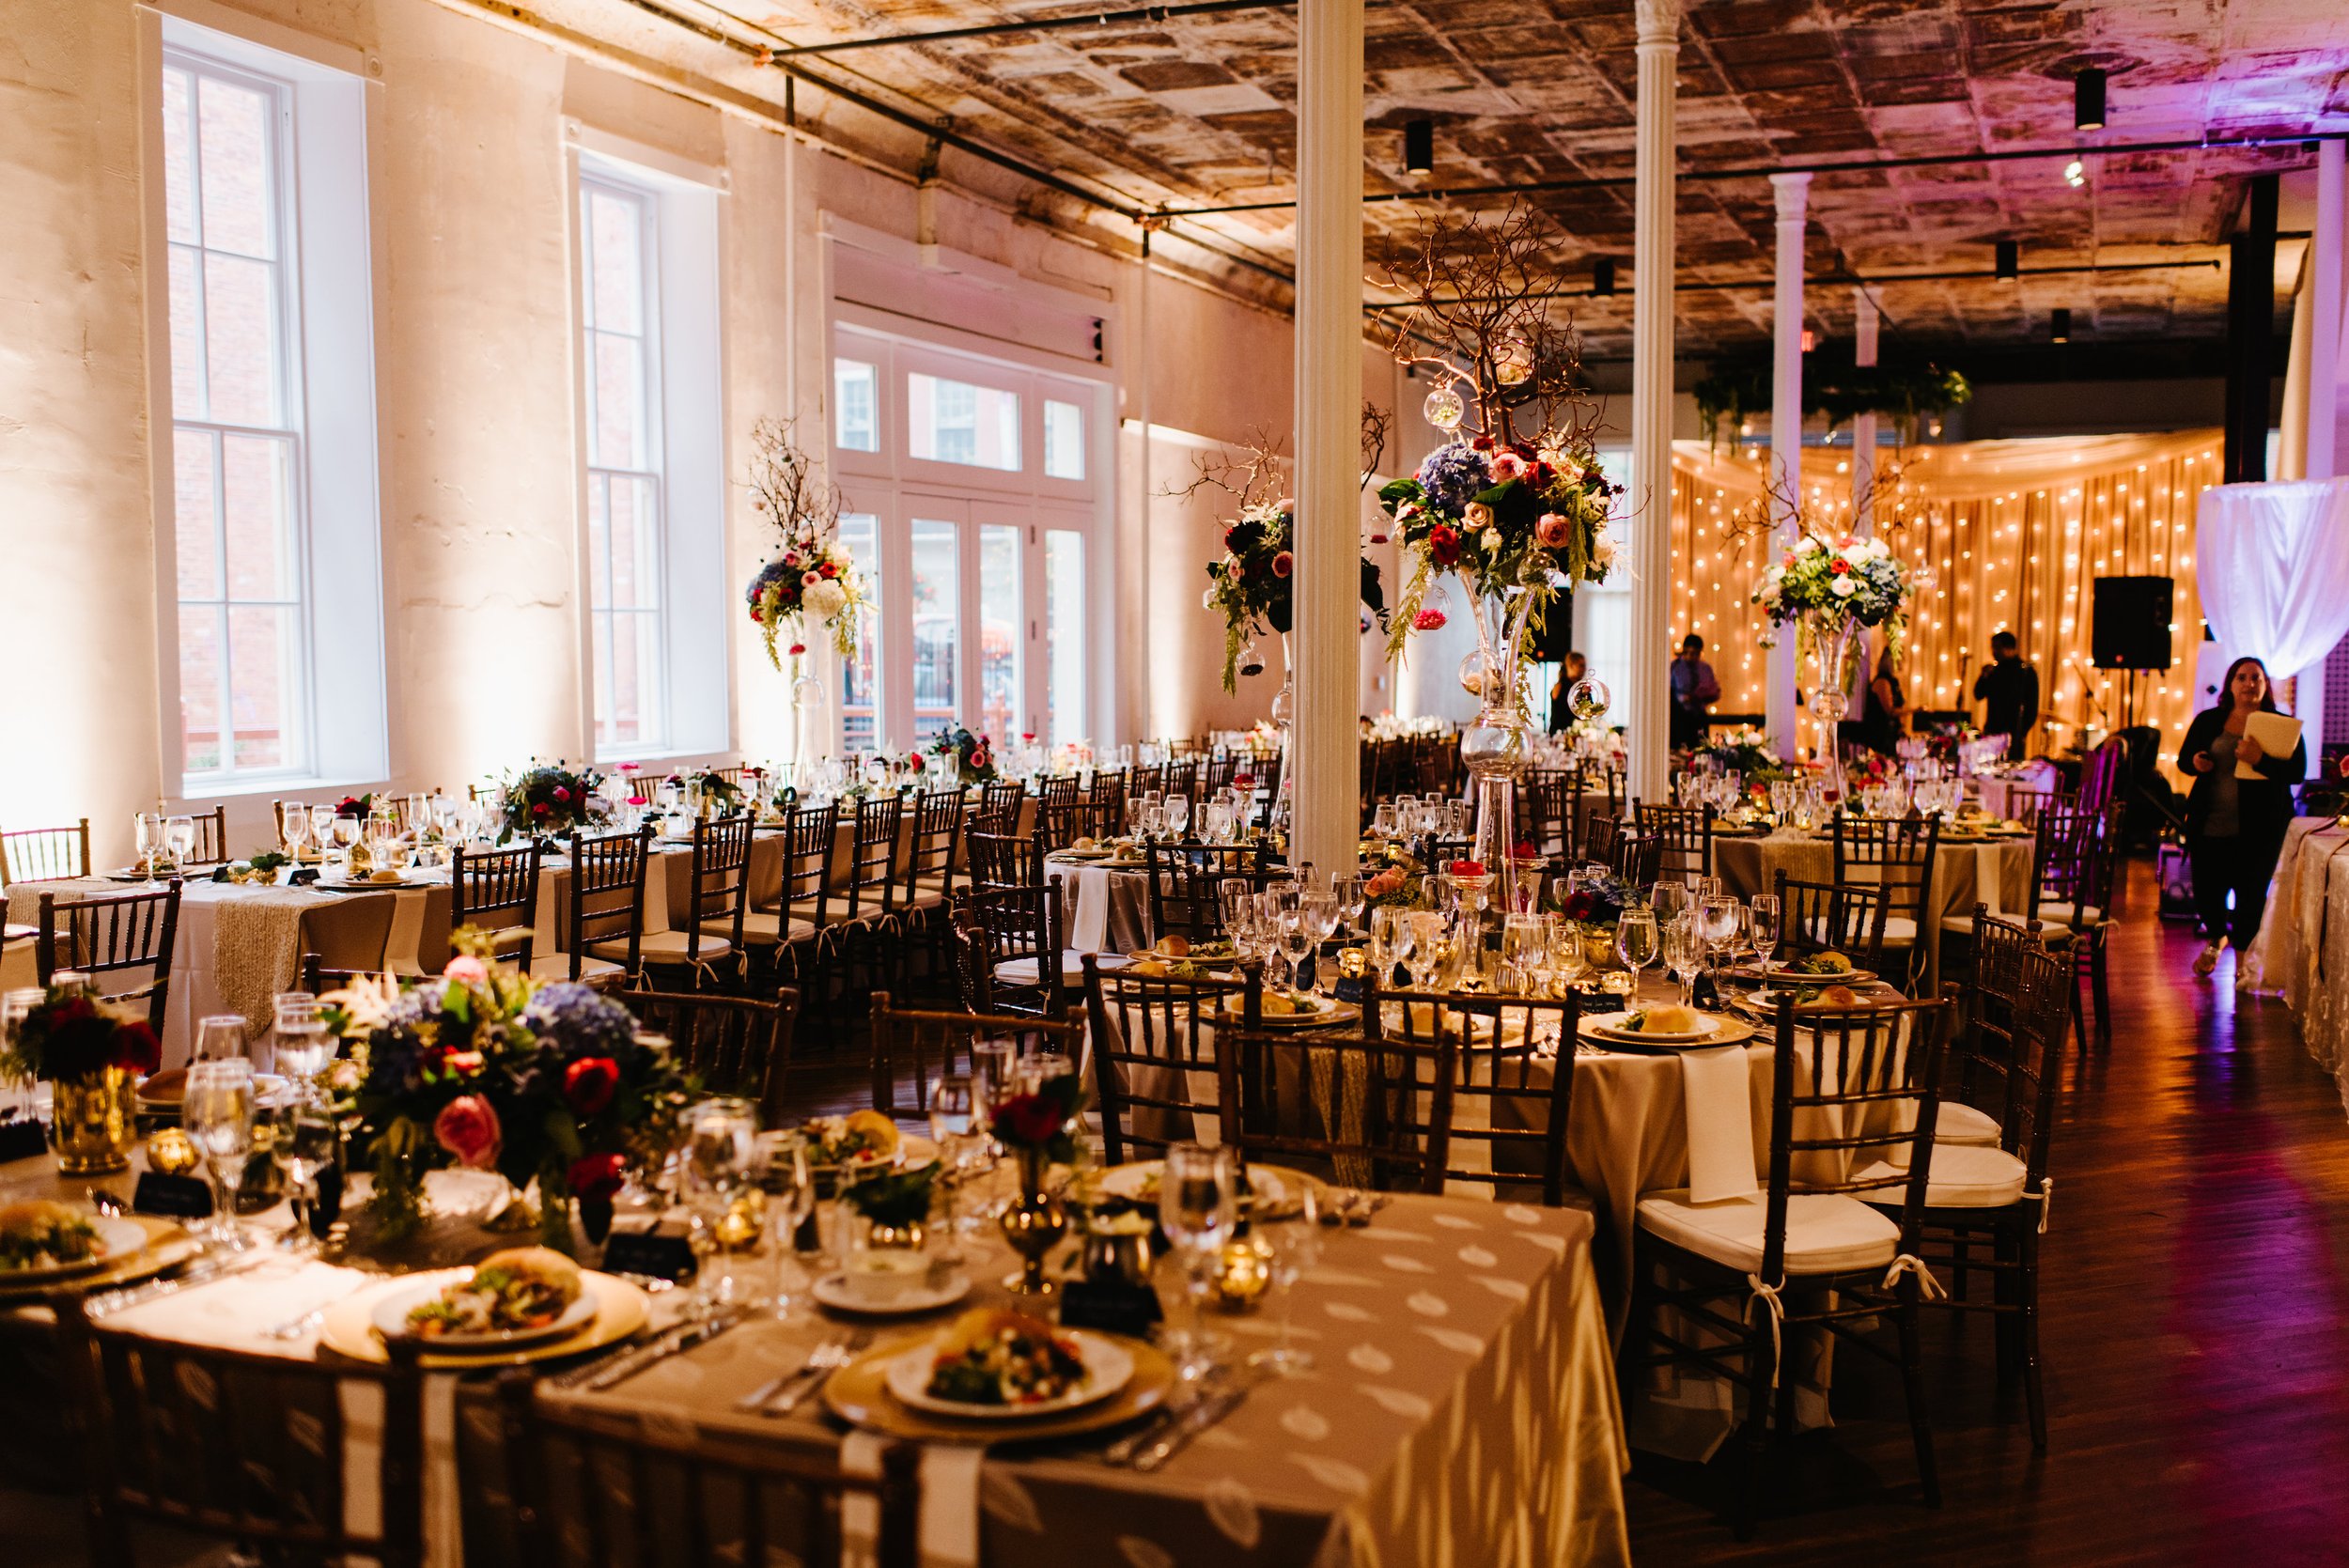 Wedding reception dinner tables with up lighting moody vibe